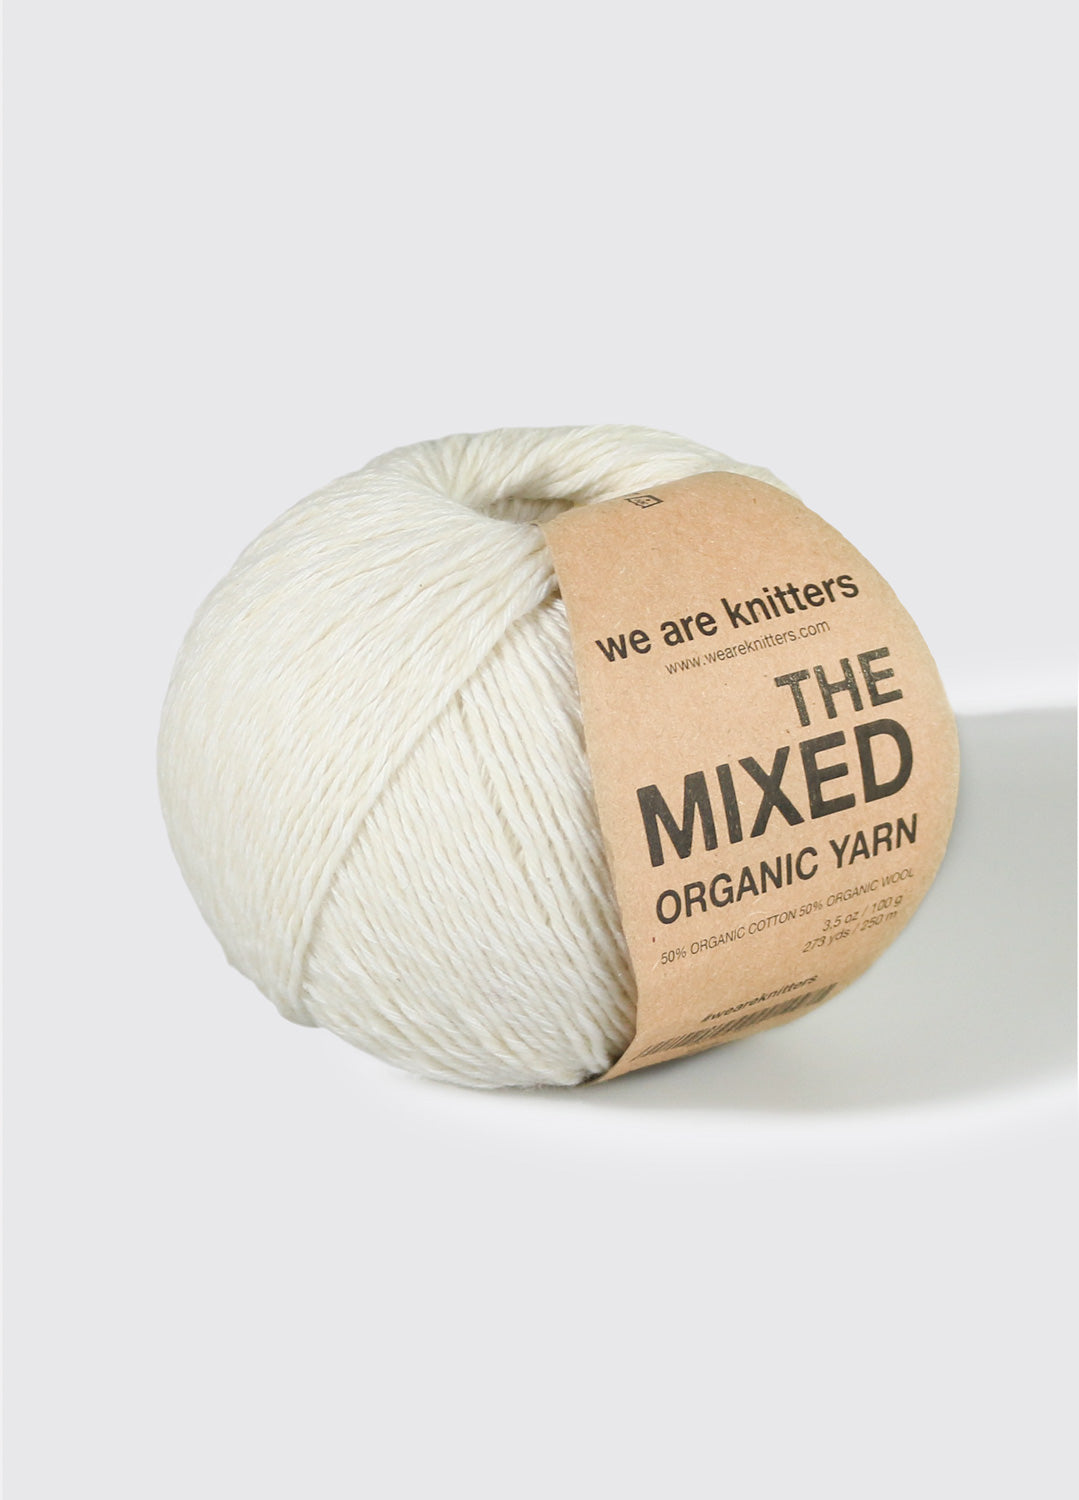 Yarn - Shop by Yarn Weight - 6 - Super Bulky - Filter by Color